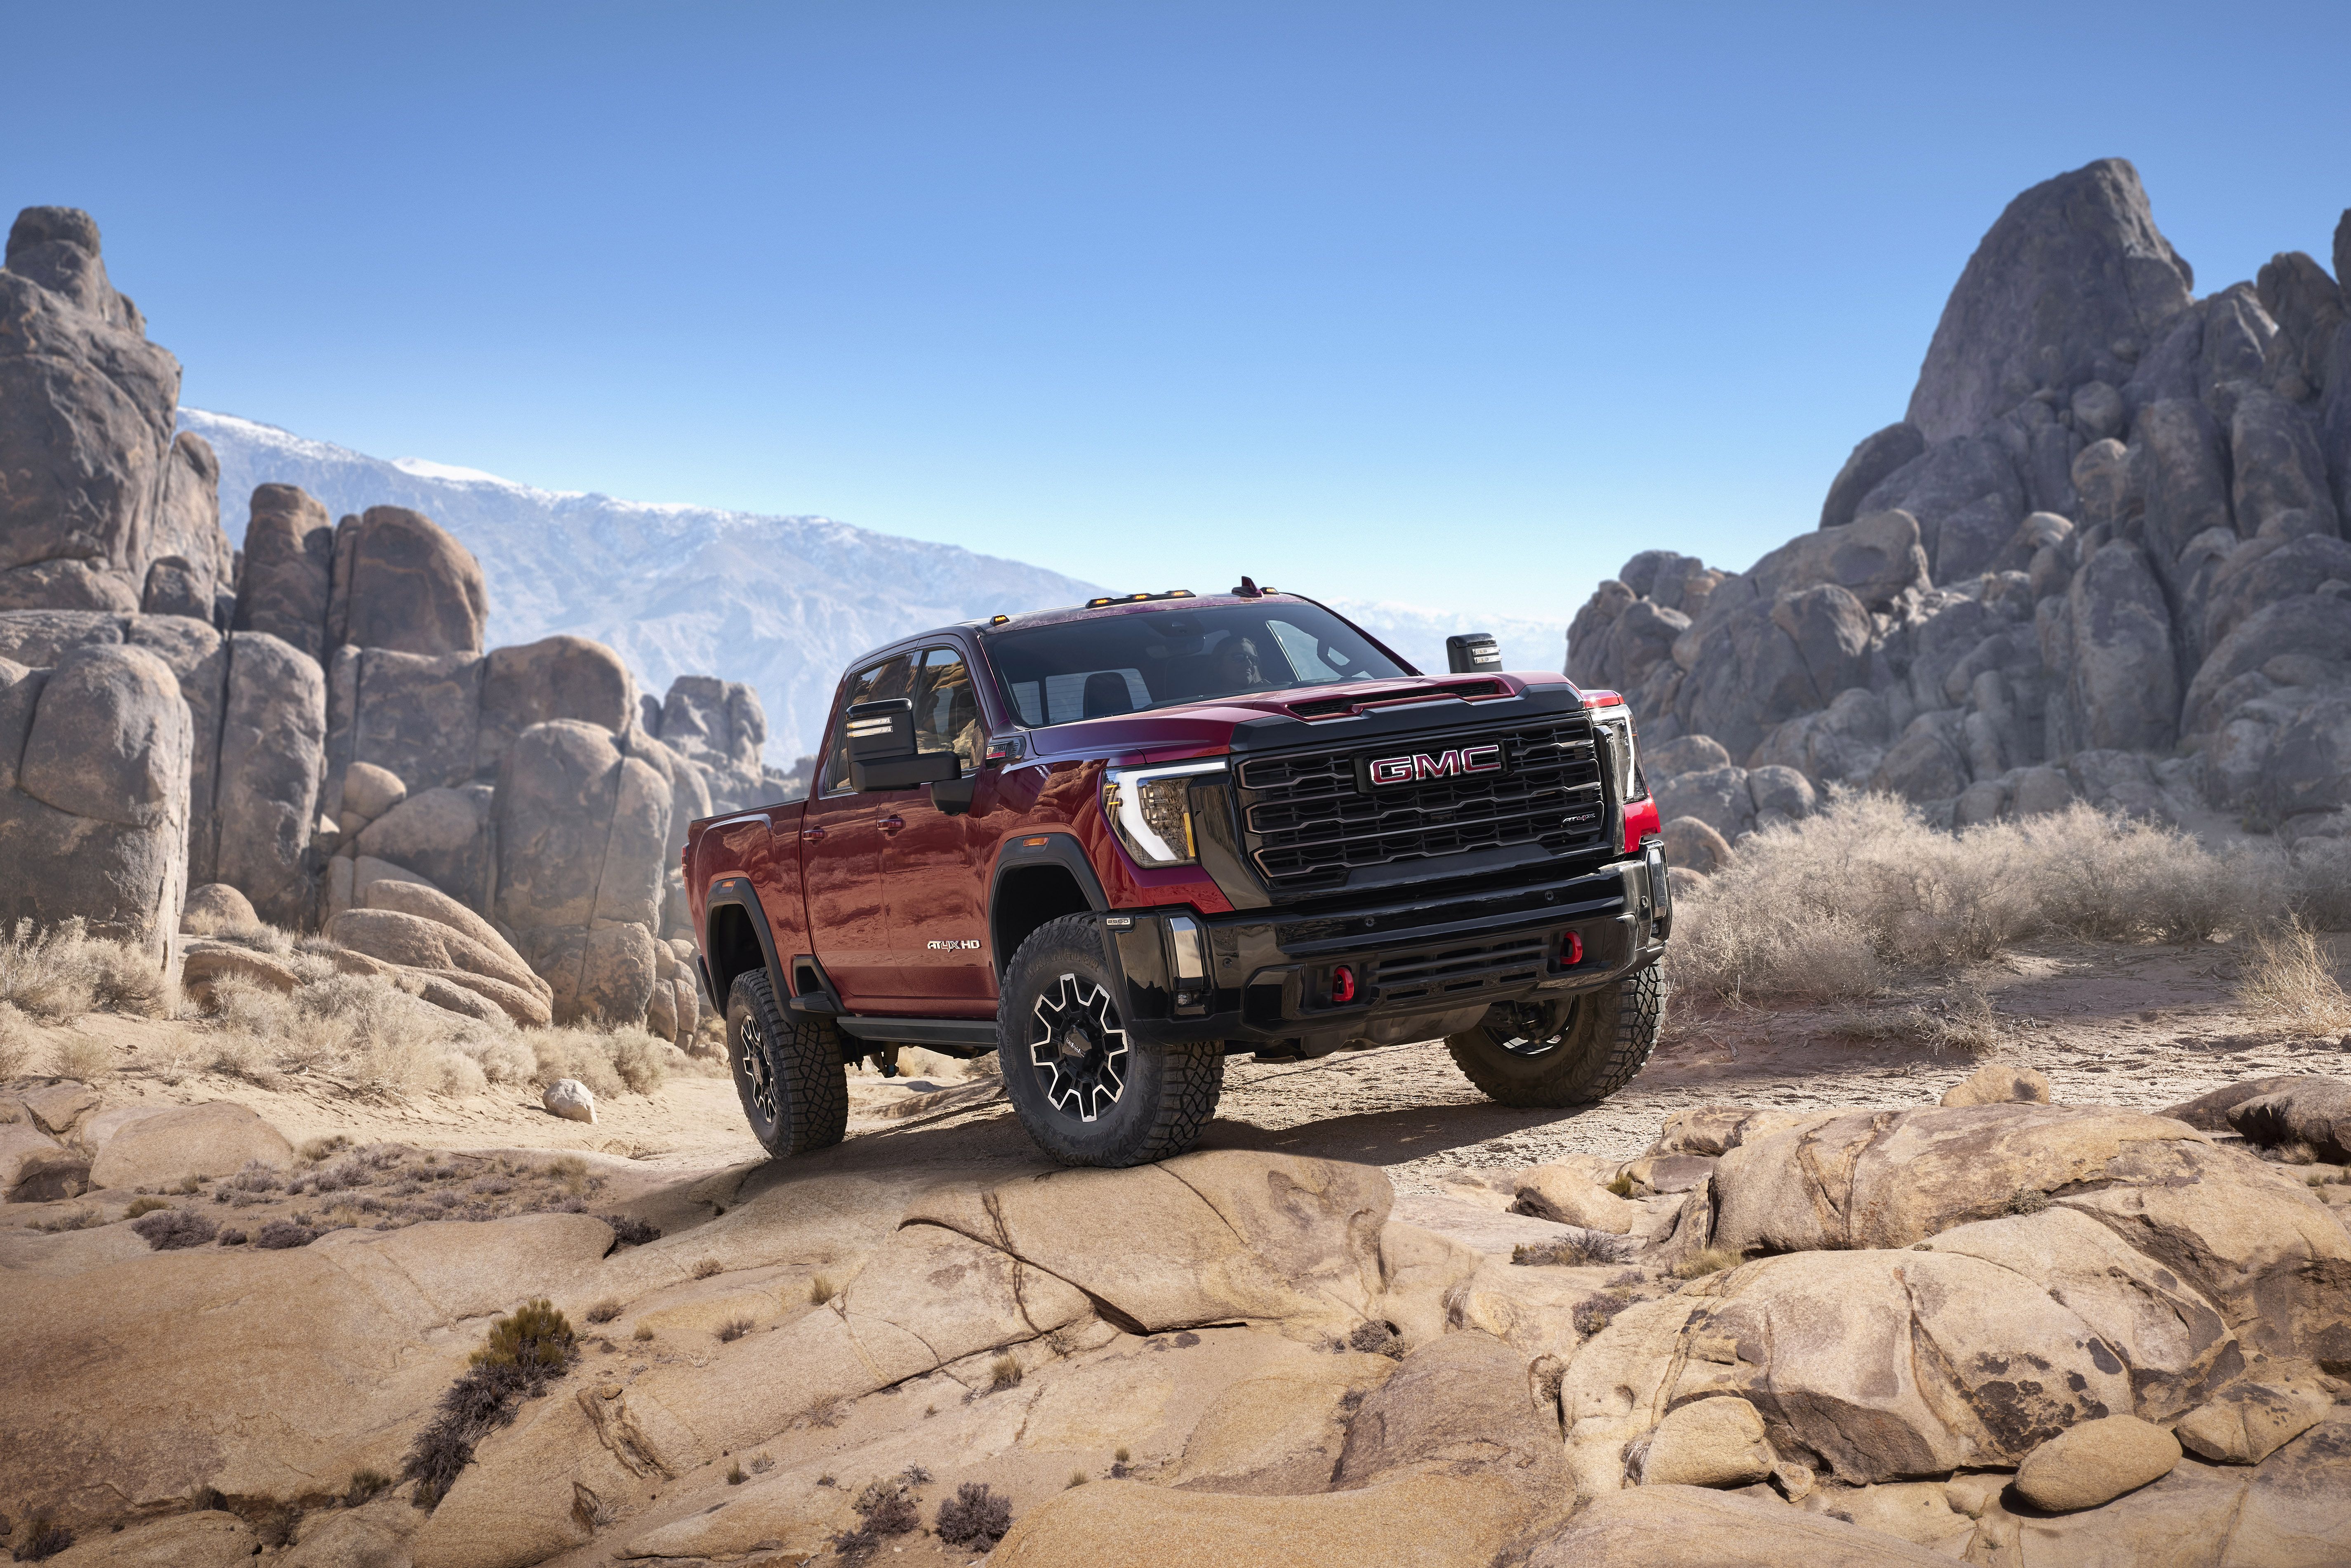 The Top 10 Off-Road Vehicles for Conquering Any Terrain - GMC Sierra AT4 Specs and Features